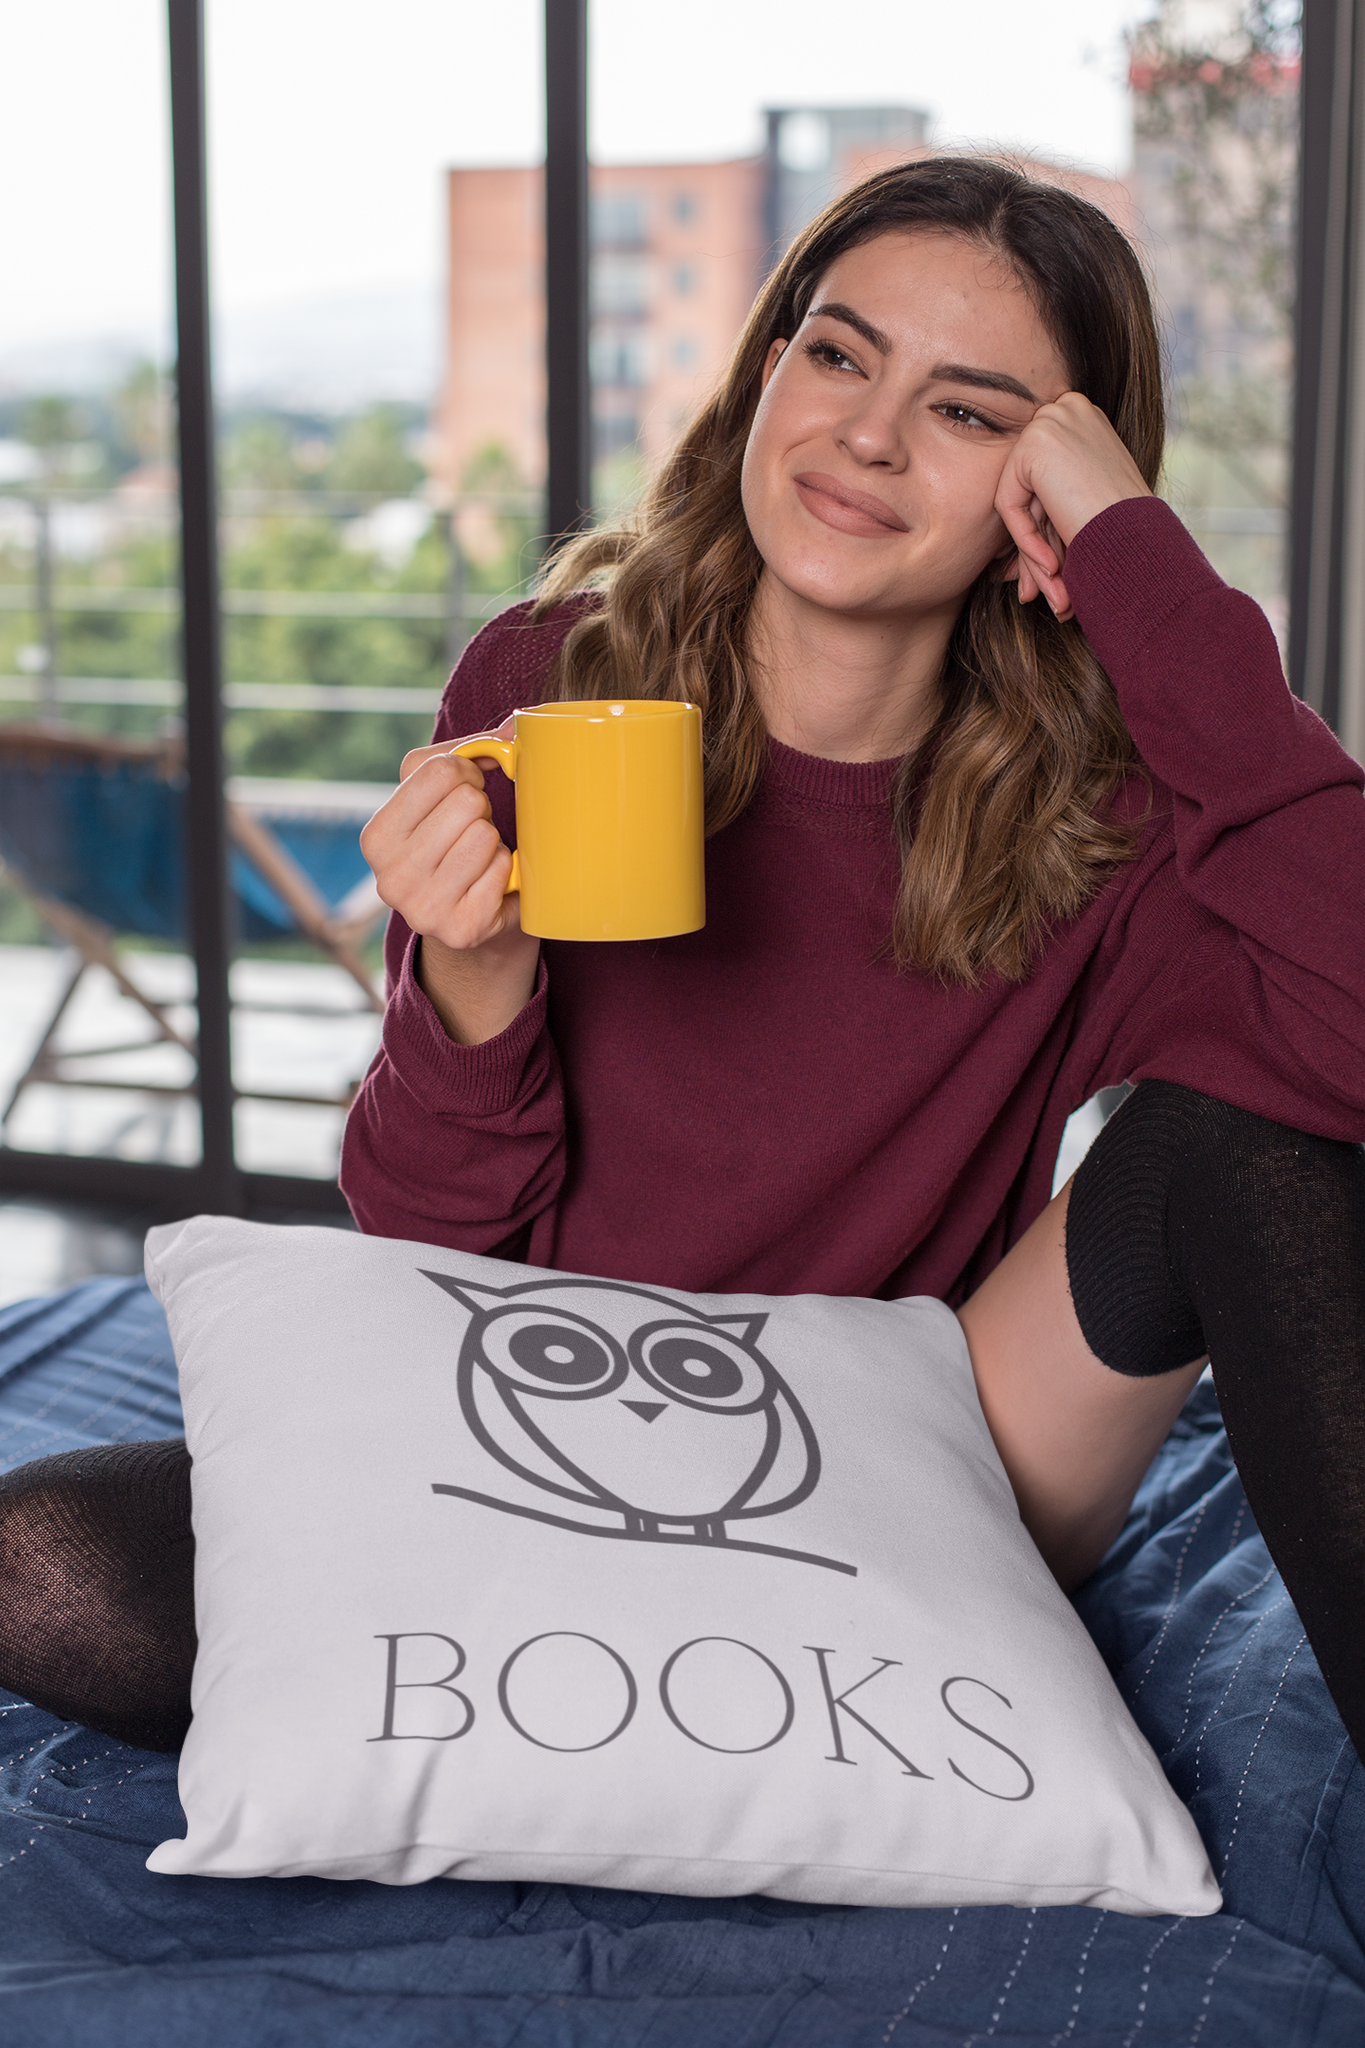 Book Owl Square Pillow - A Bookish Haven